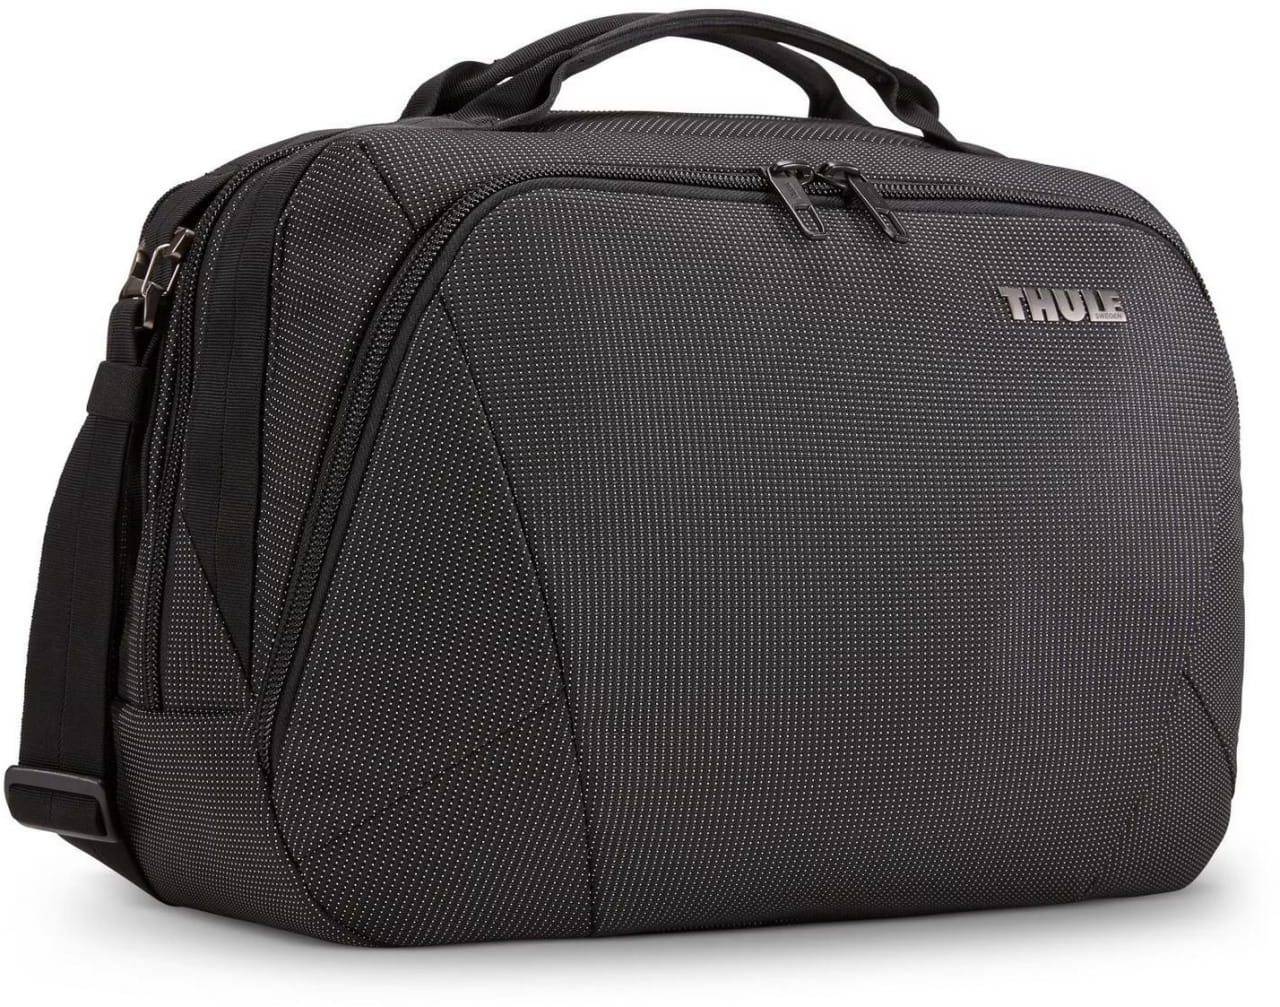 Bagages de cabine Thule Crossover 2